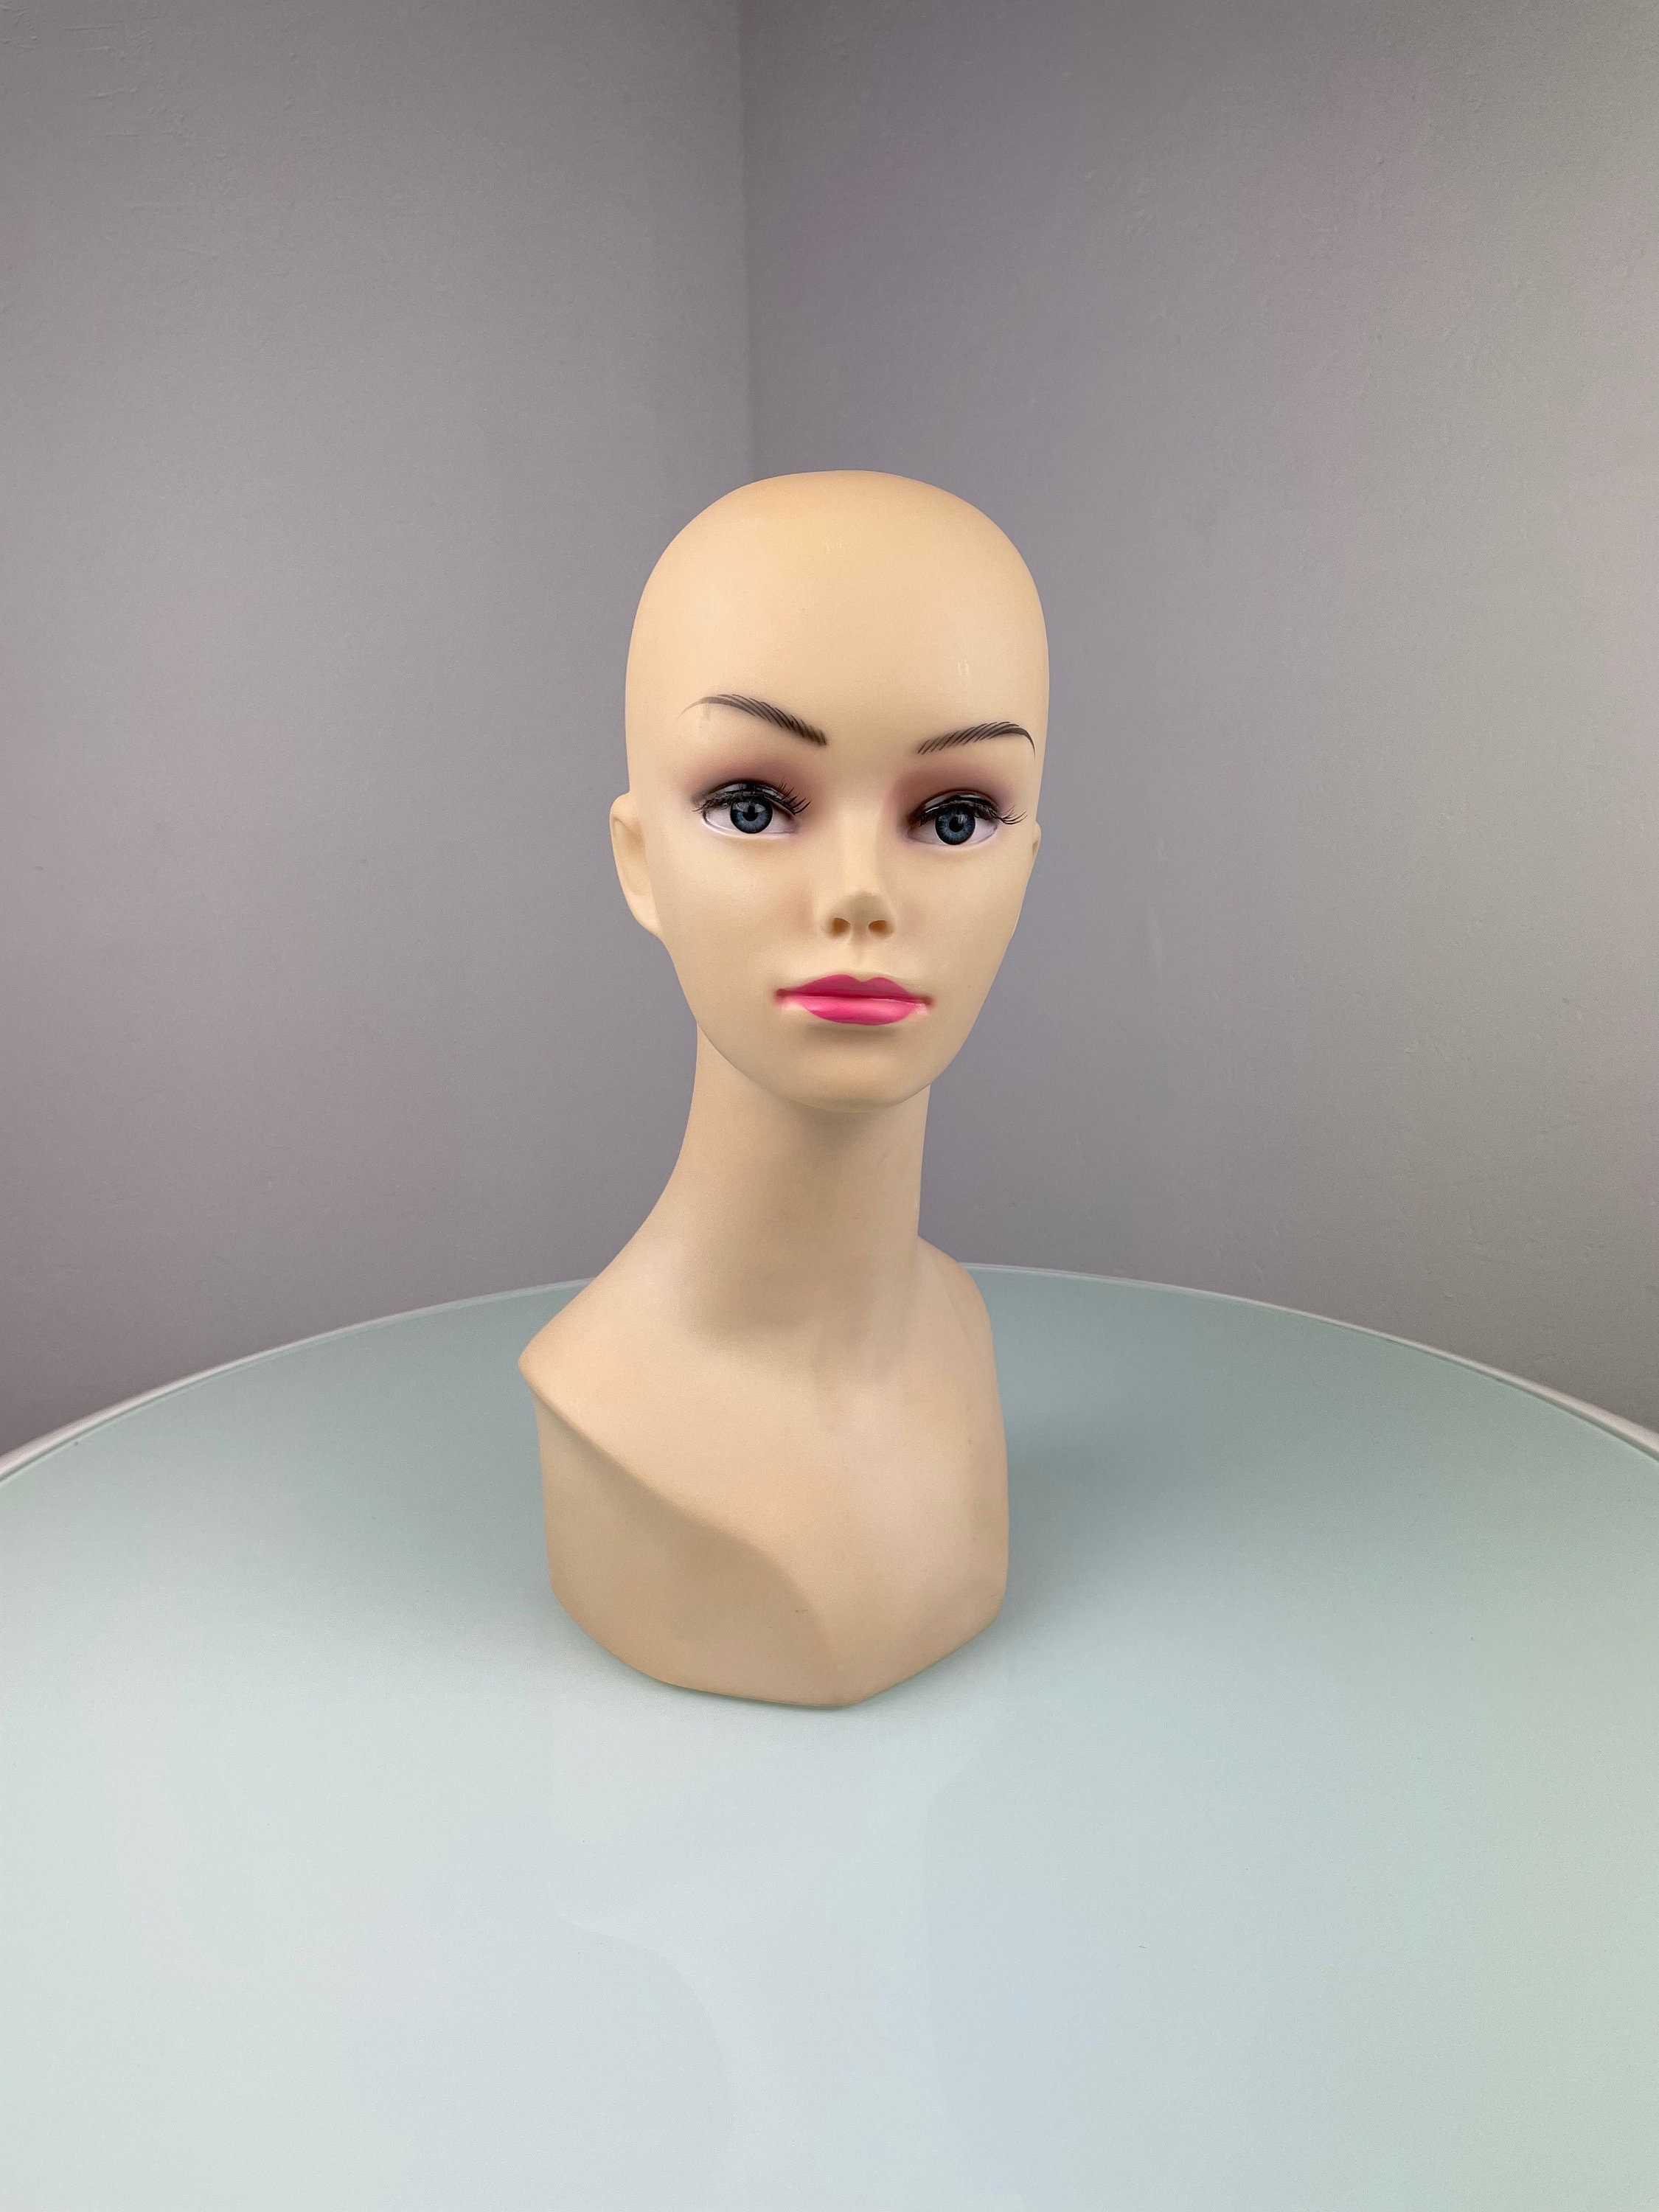 Mannequin Head With Shoulders, Mannequin Head & Amazing Makeup, Mannequin  for Wig, Female Realistic Mannequin Head, Vintage Items, Jenna / 6 